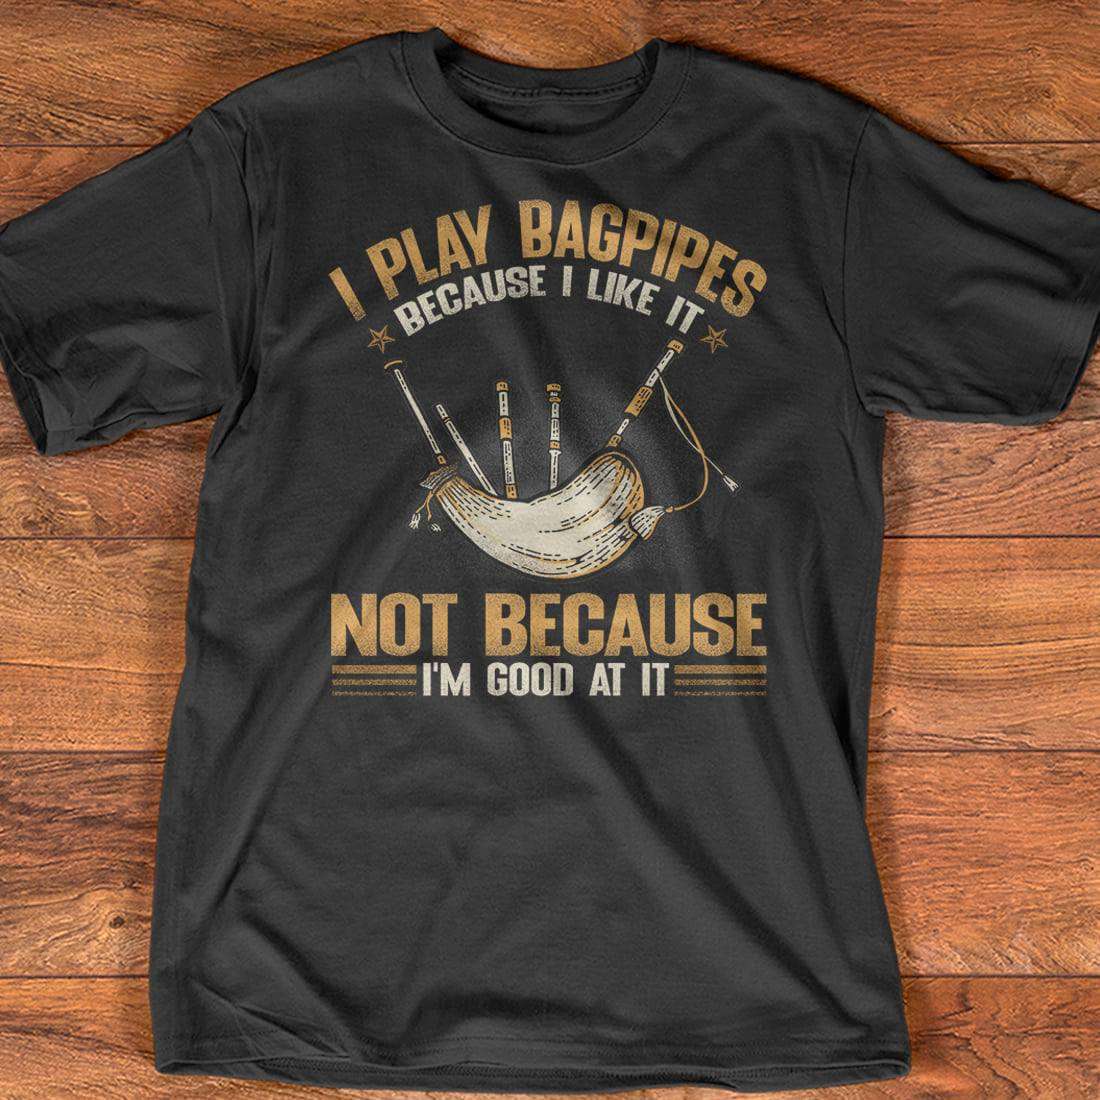 Bagpipes Lover - I play bagpipes because i like it not because i'm good at it